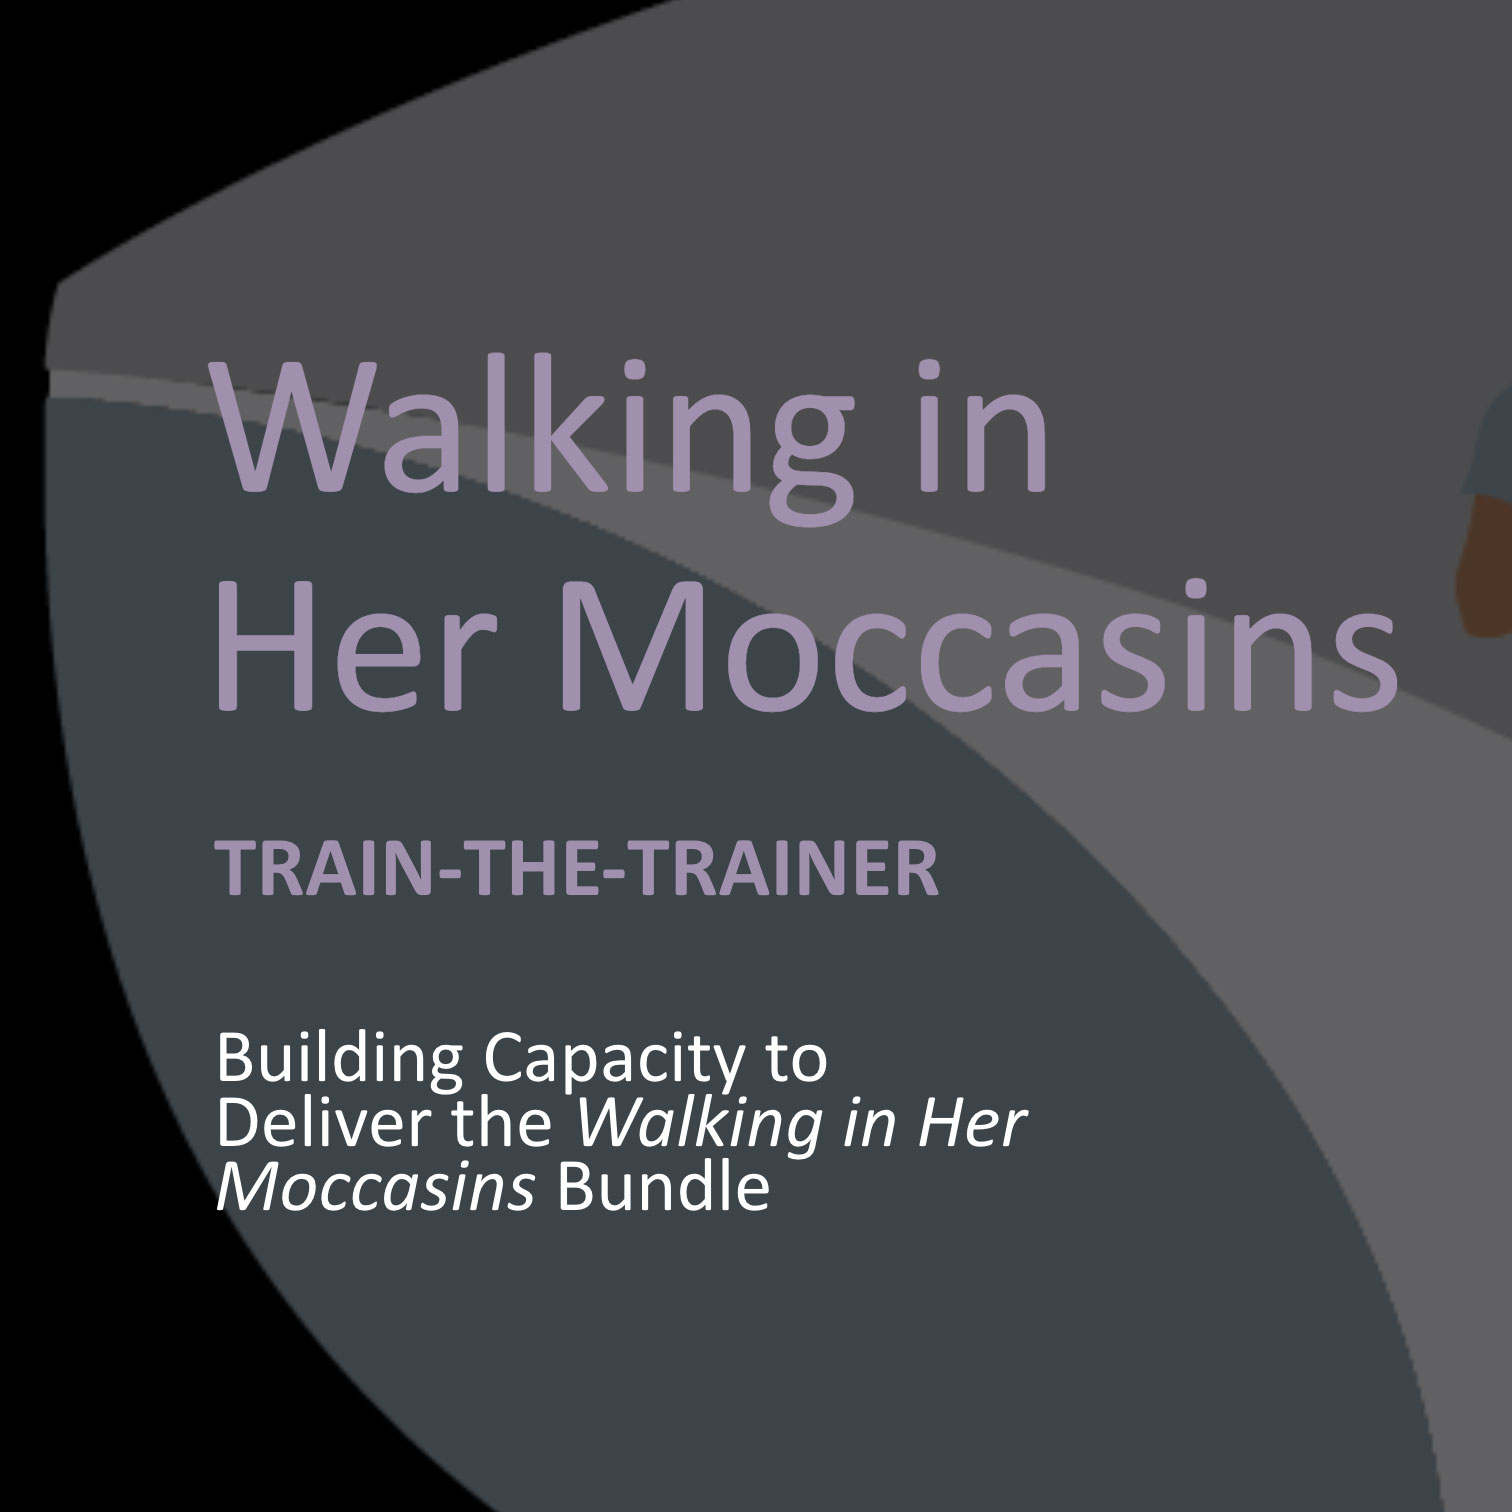 Cover image for the walking in her moccasins train the trainer powerpoint.